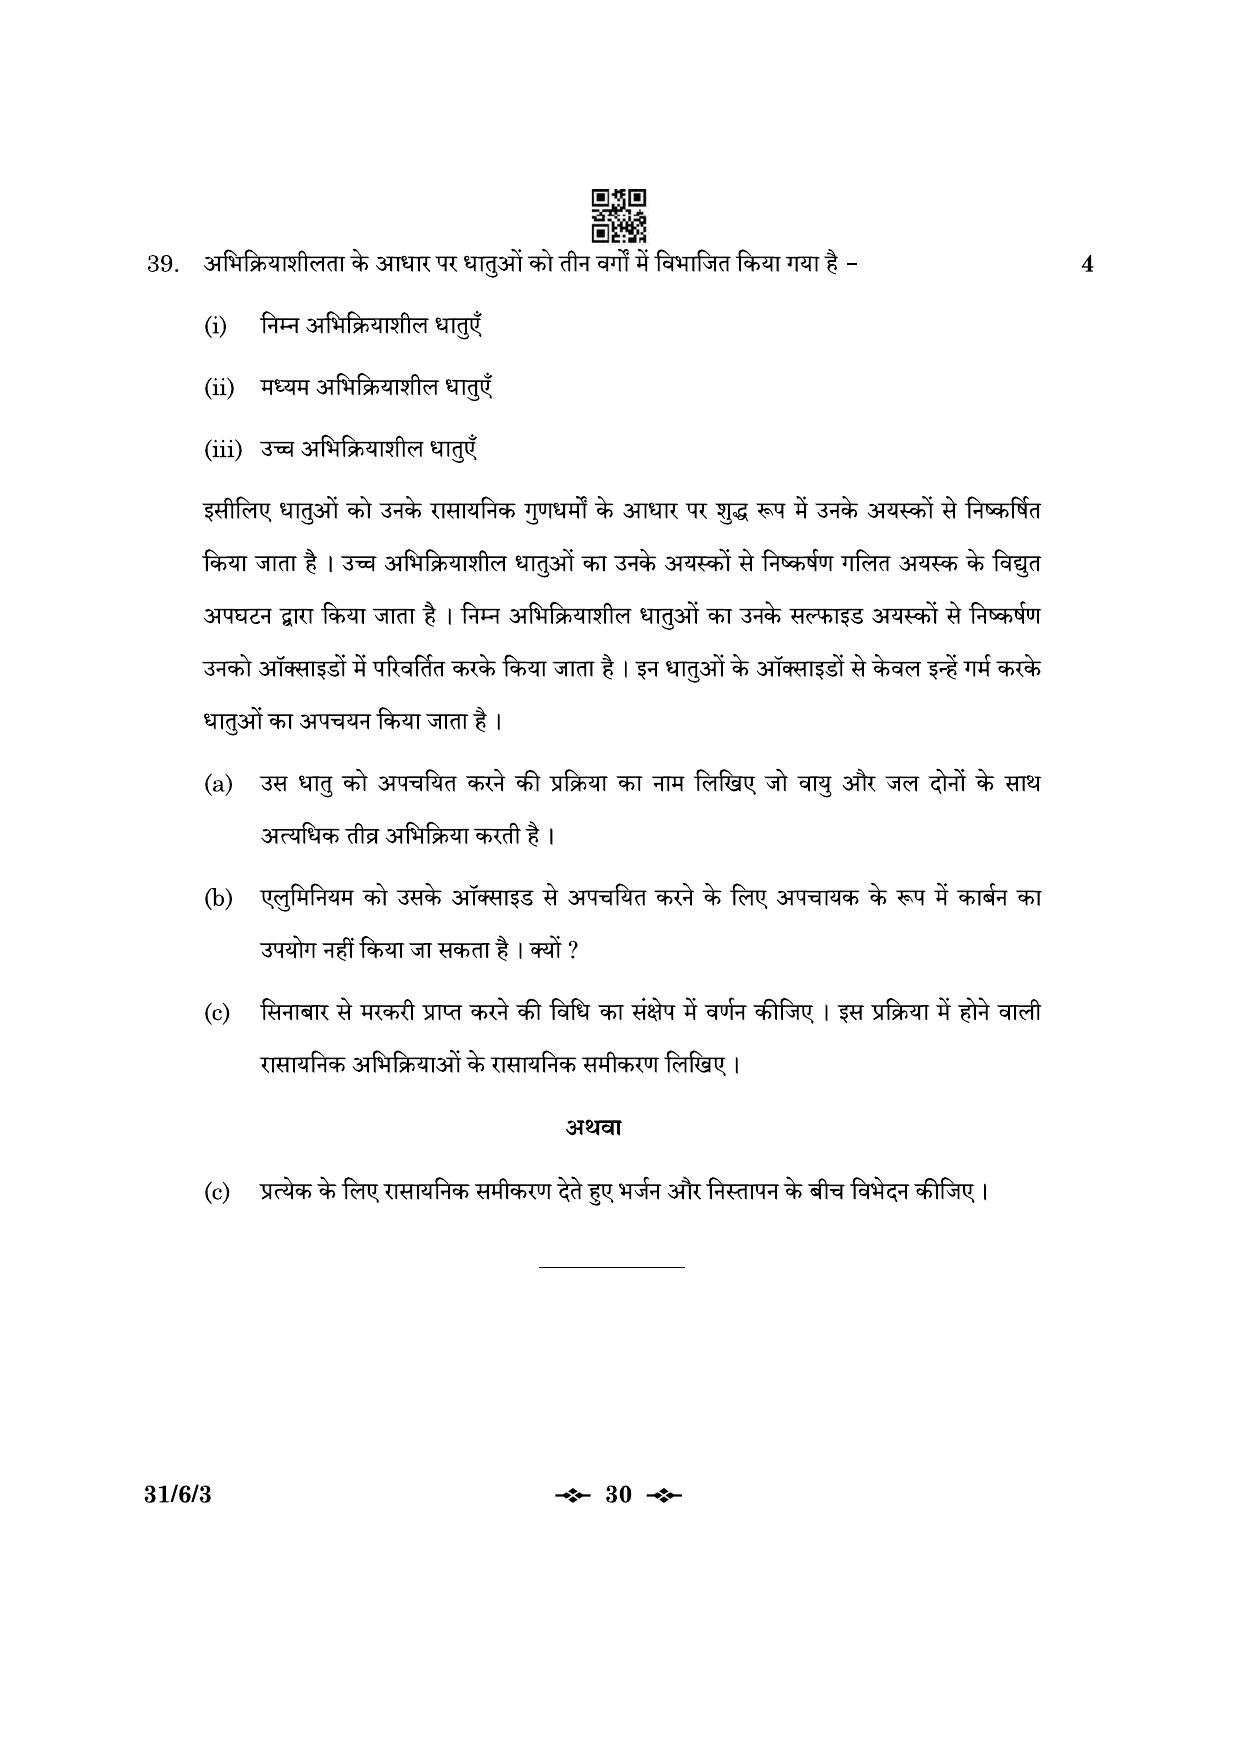 CBSE Class 10 31-6-3 Science 2023 Question Paper - Page 30